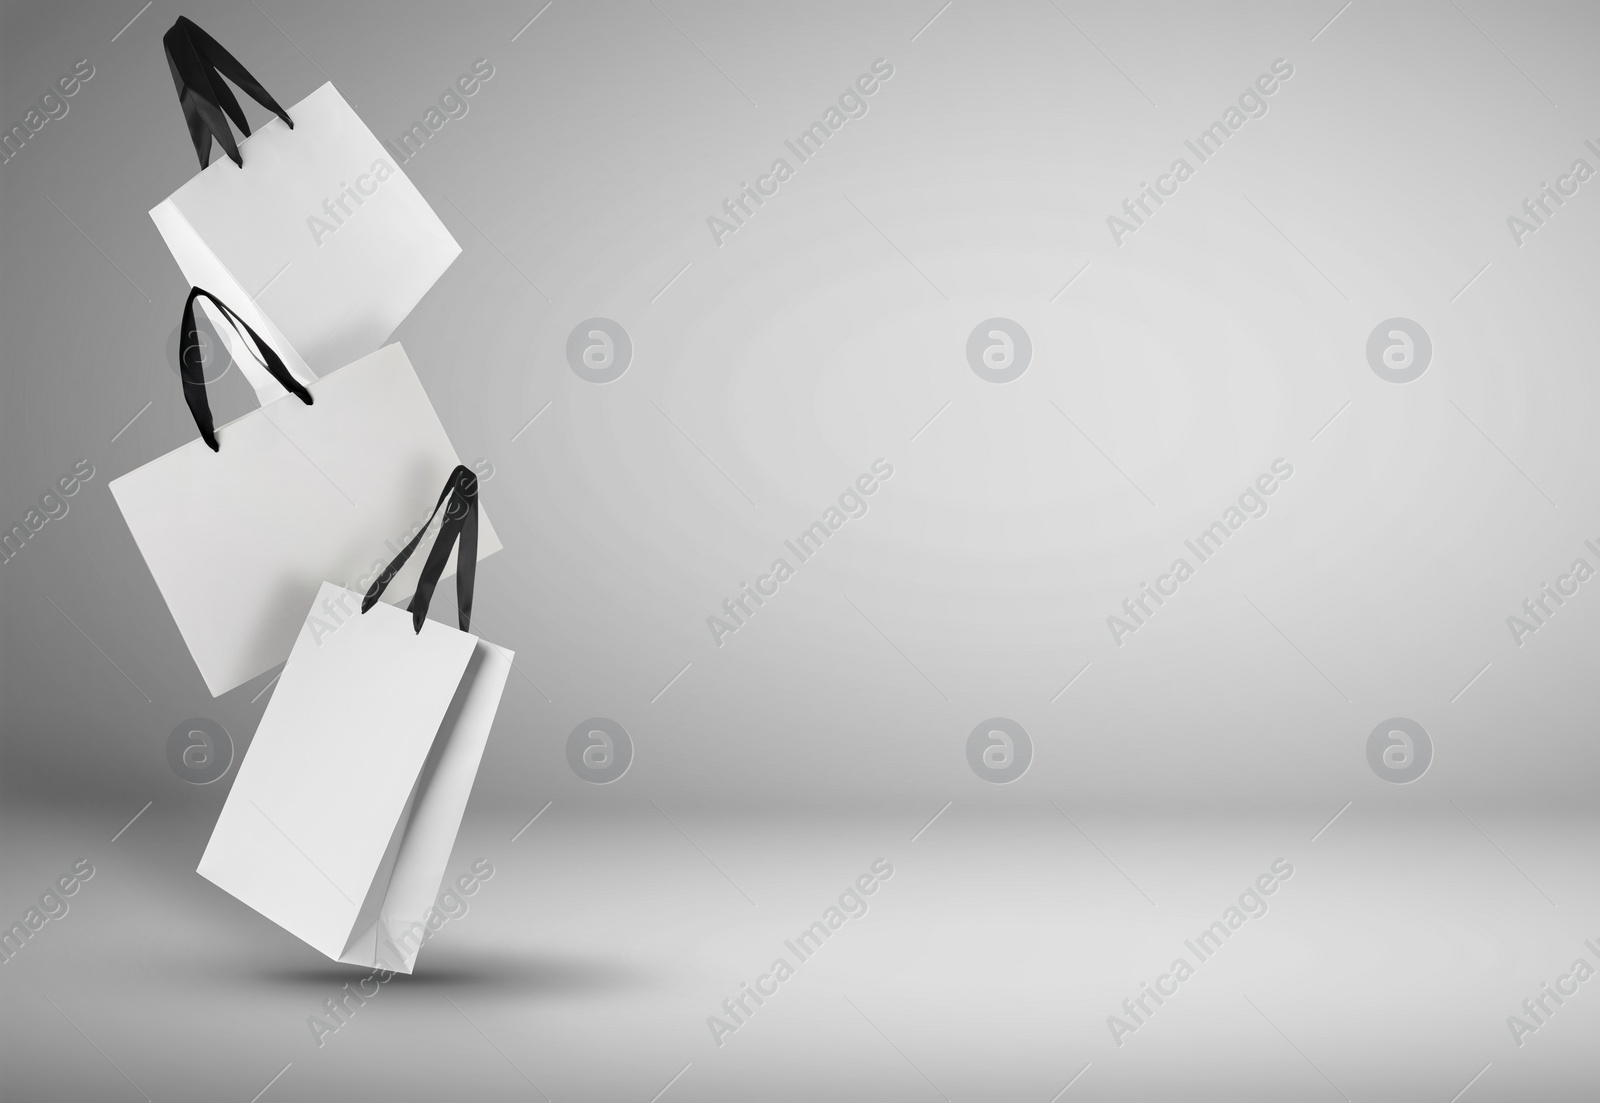 Image of Hot sale. White shopping bags in air on light gradient background, space for text